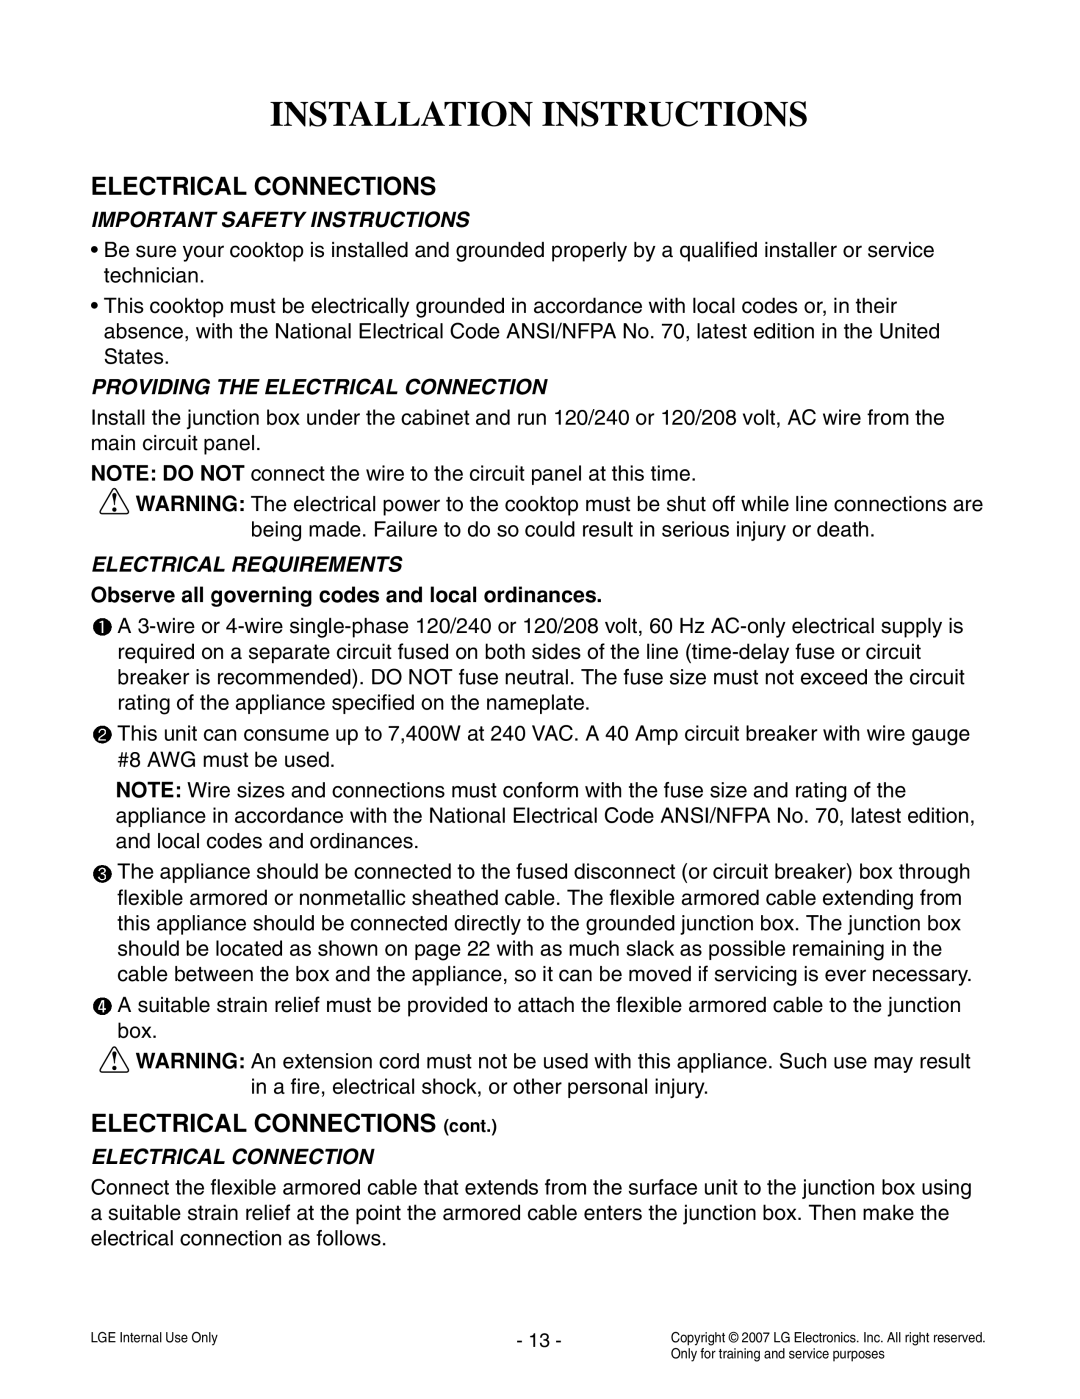 LG Electronics LCE30845 Installation Instructions, Important Safety Instructions, Providing The Electrical Connection 